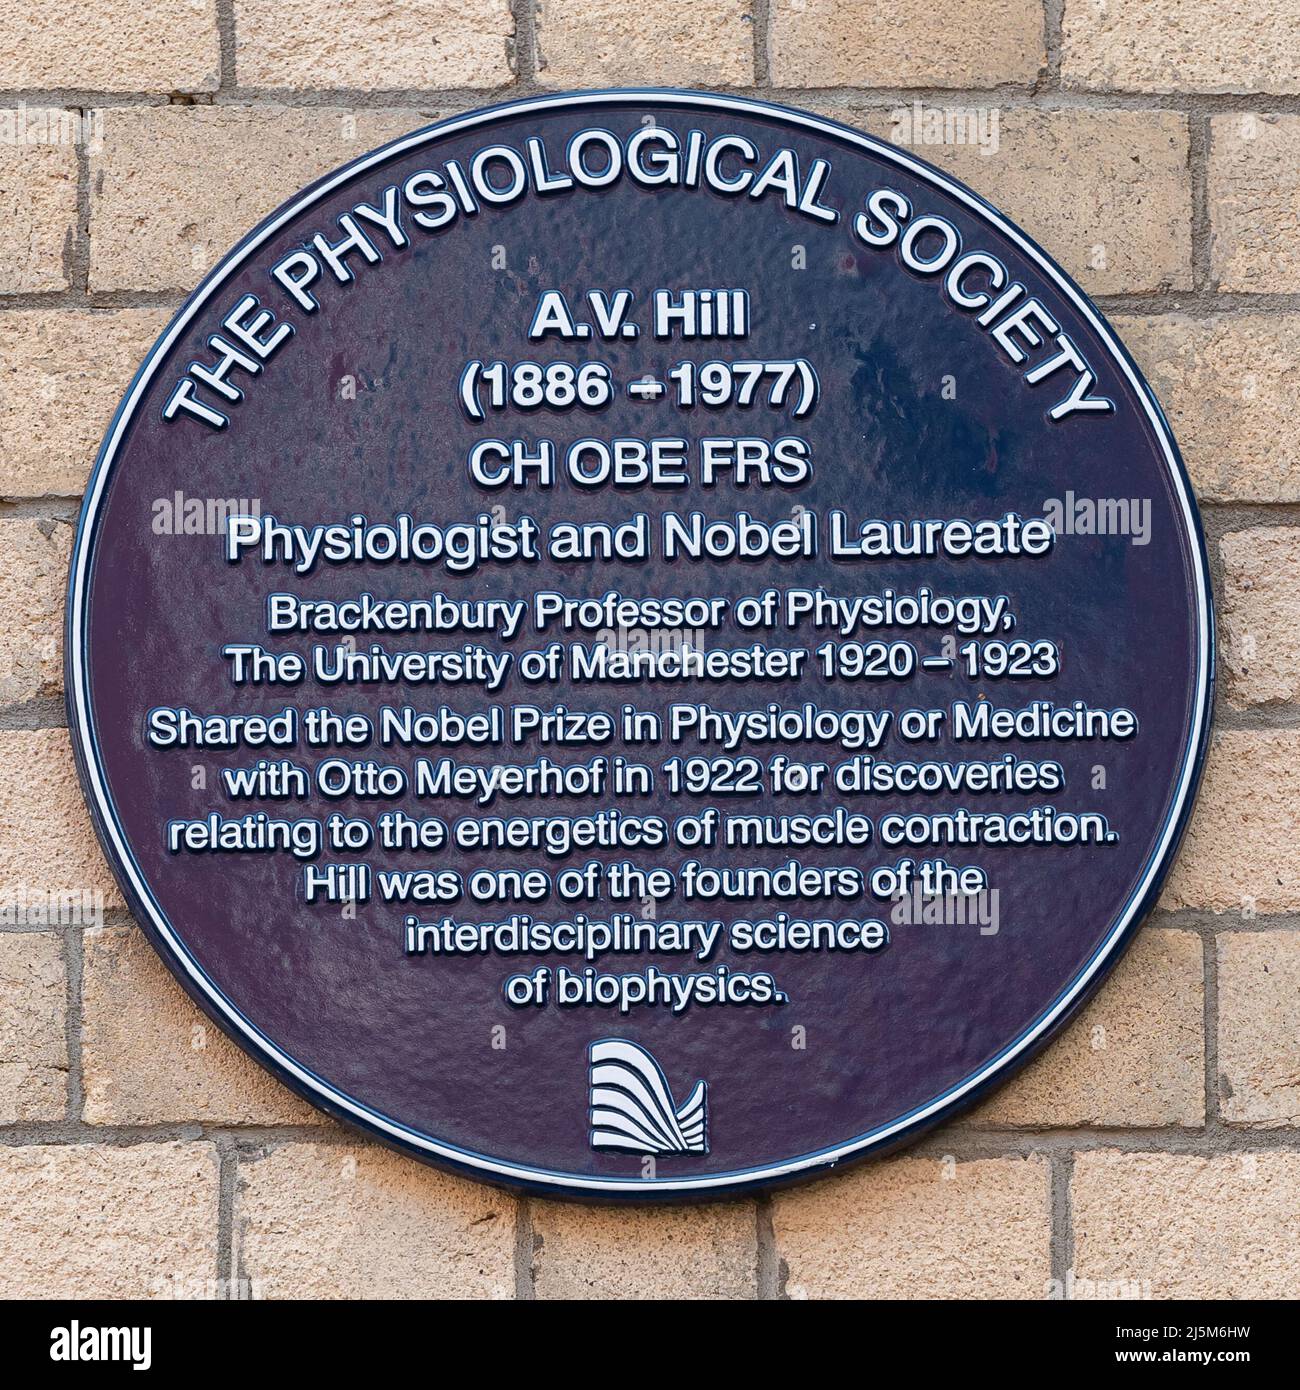 A.V. Hill (1886 -1977) CH OBE FRS Physiologist and Nobel Laureate Brackenbury Professor of Physiology, The University of Manchester 1920 - 1923 Stock Photo